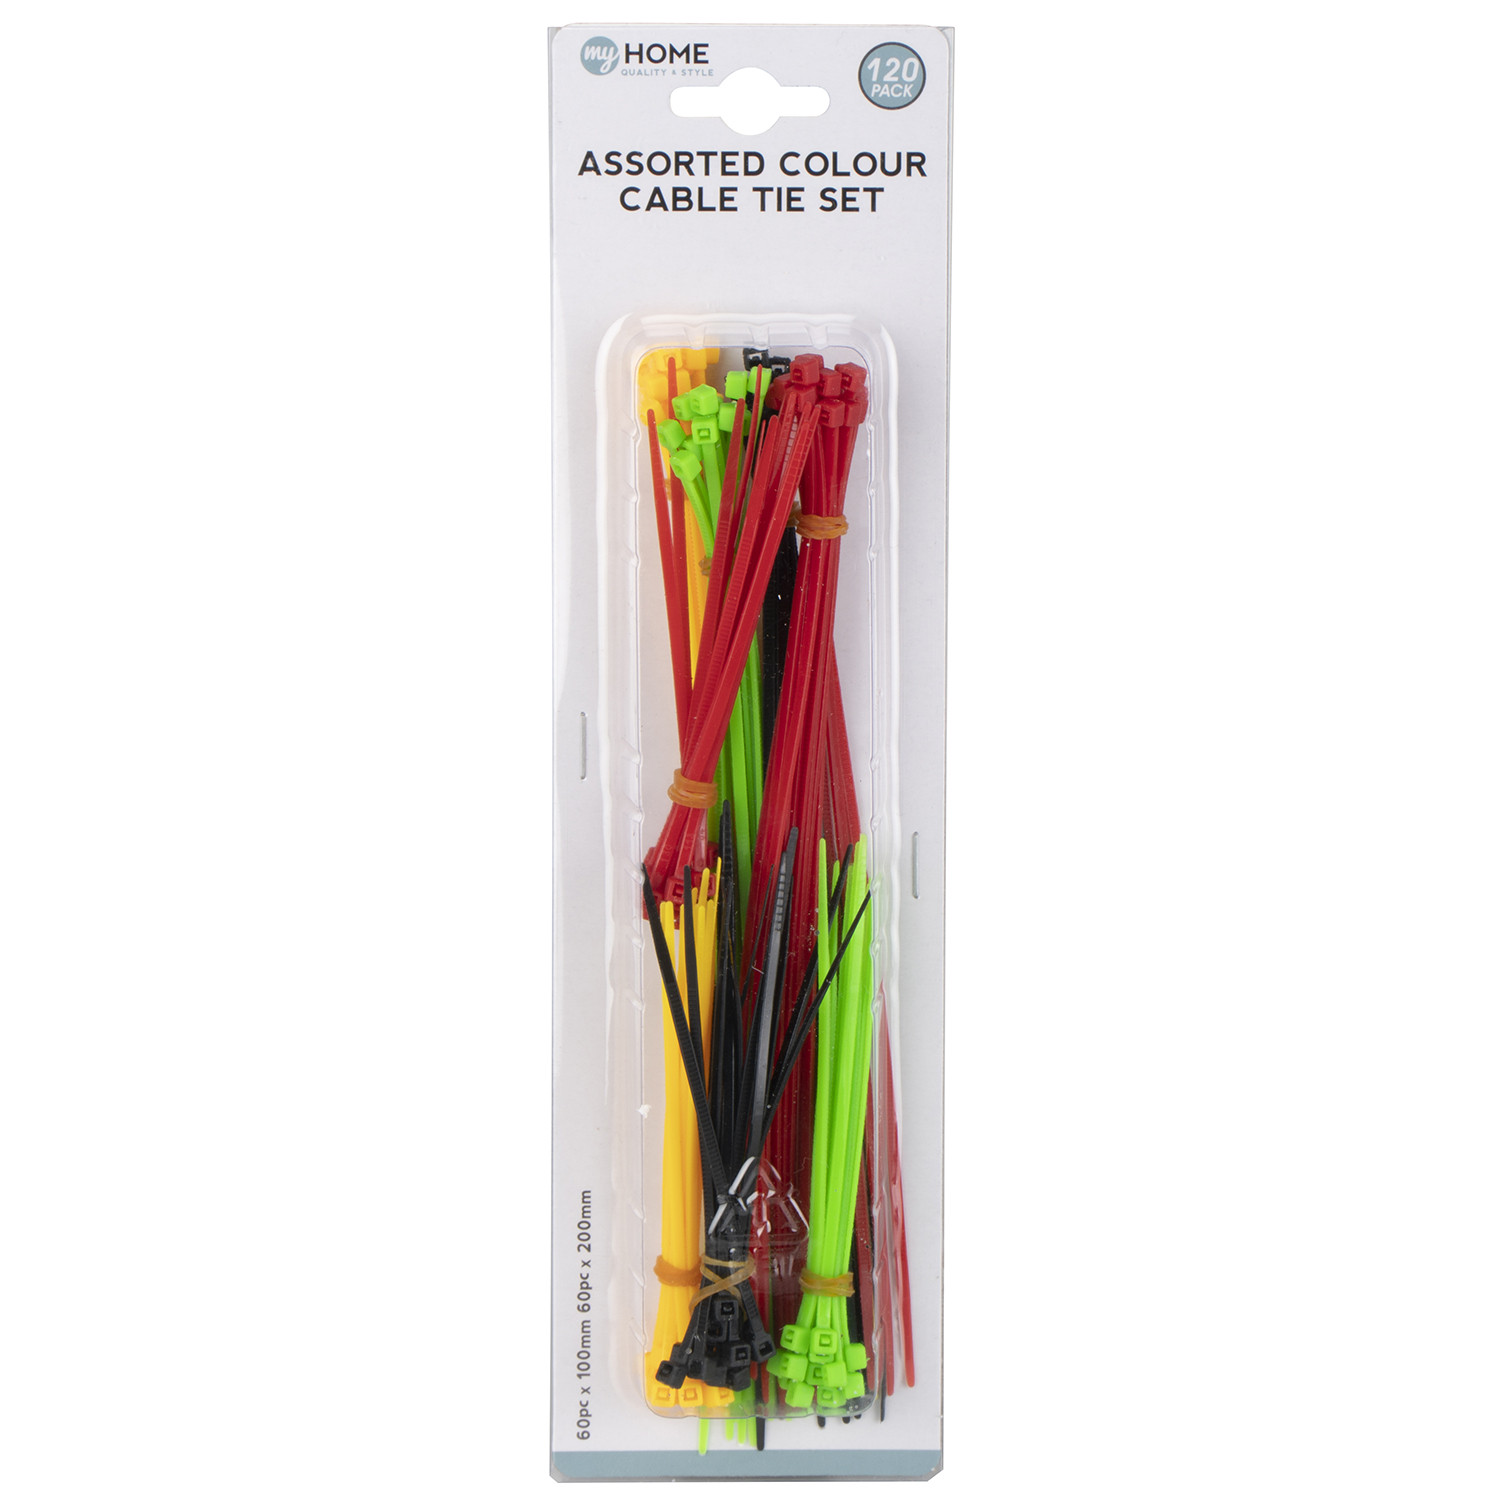 My Home Mixed Colours Cable Tie 120 Pack Image